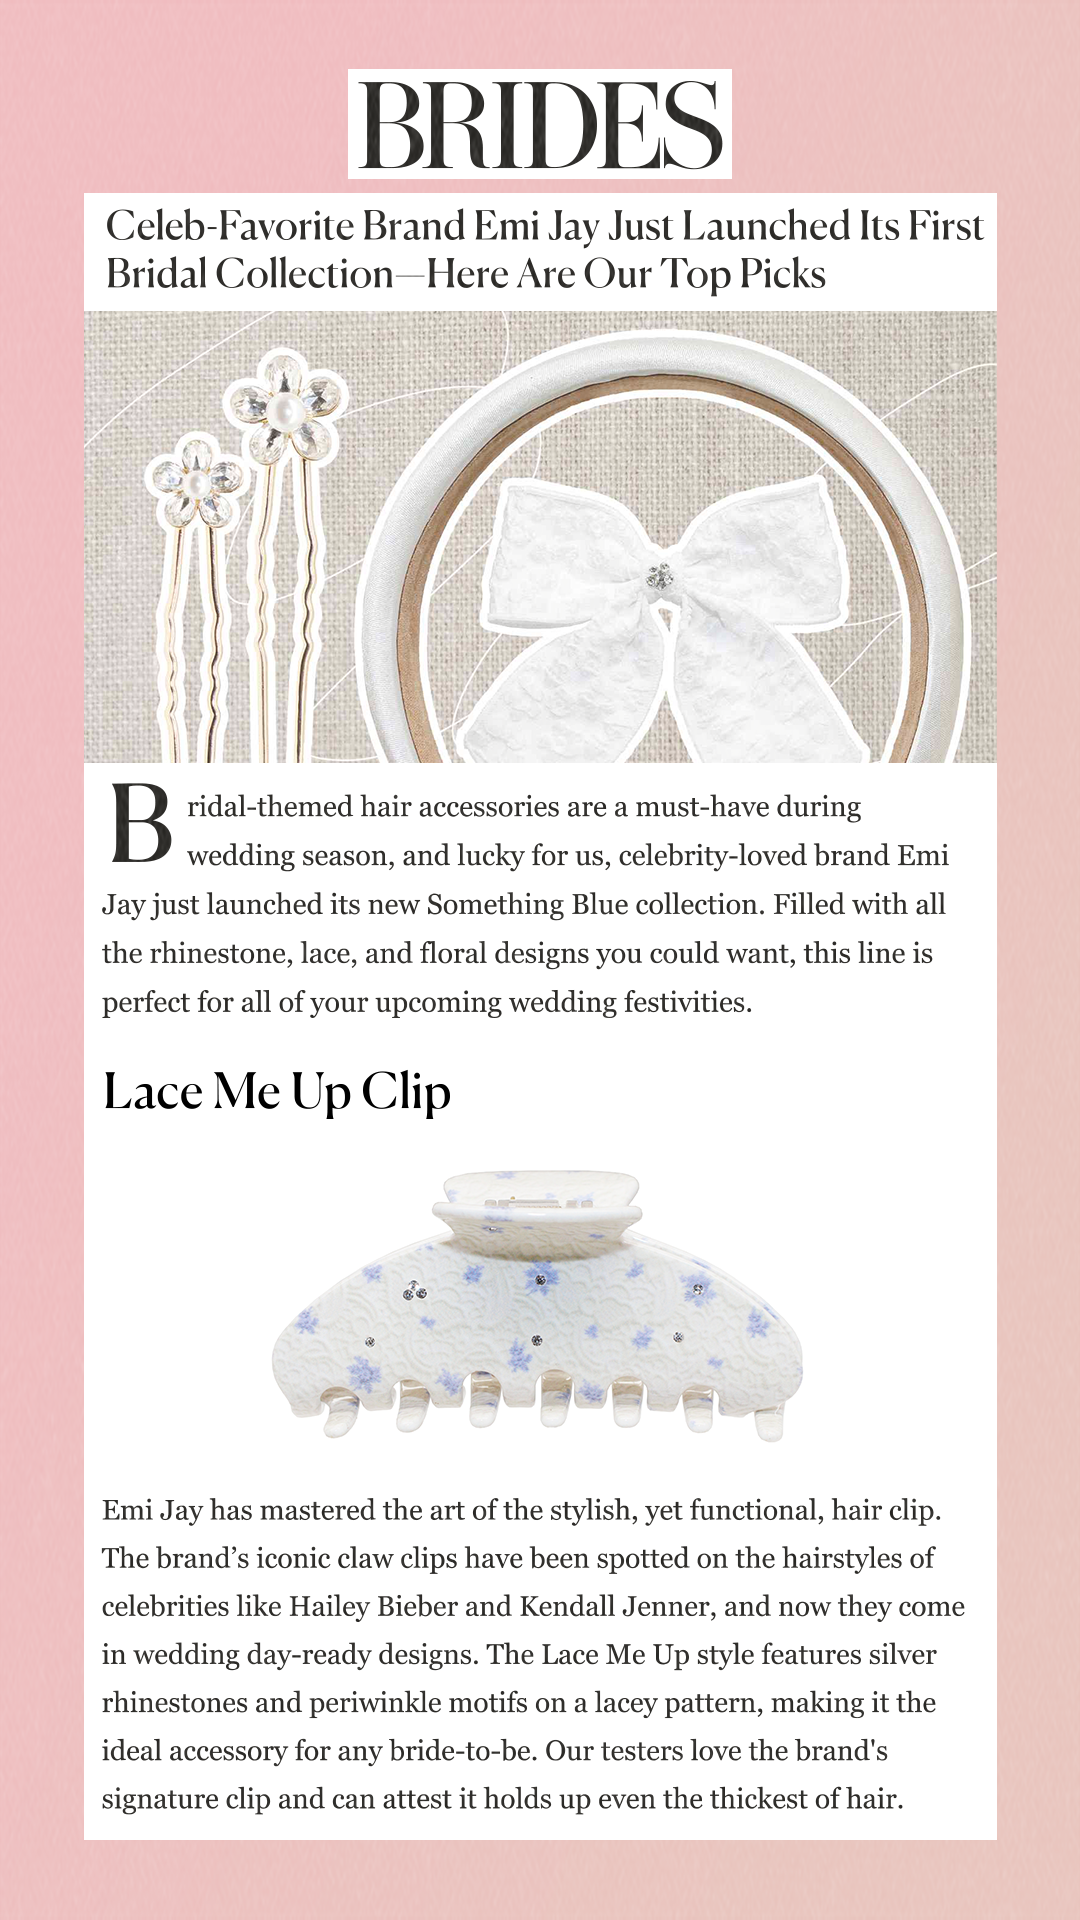 Celeb-Favorite Brand Emi Jay Just Launched Its First Bridal Collection—Here Are Our Top Picks Bridal-themed hair accessories are a must-have during wedding season, and lucky for us, celebrity-loved brand Emi Jay just launched its new Something Blue collection. Filled with all the rhinestone, lace, and floral designs you could want, this line is perfect for all of your upcoming wedding festivities. Lace Me Up Clip Emi Jay has mastered the art of the stylish, yet functional, hair clip. The brand’s iconic claw clips have been spotted on the hairstyles of celebrities like Hailey Bieber and Kendall Jenner, and now they come in wedding day-ready designs. The Lace Me Up style features silver rhinestones and periwinkle motifs on a lacey pattern, making it the ideal accessory for any bride-to-be. Our testers love the brand's signature clip and can attest it holds up even the thickest of hair.